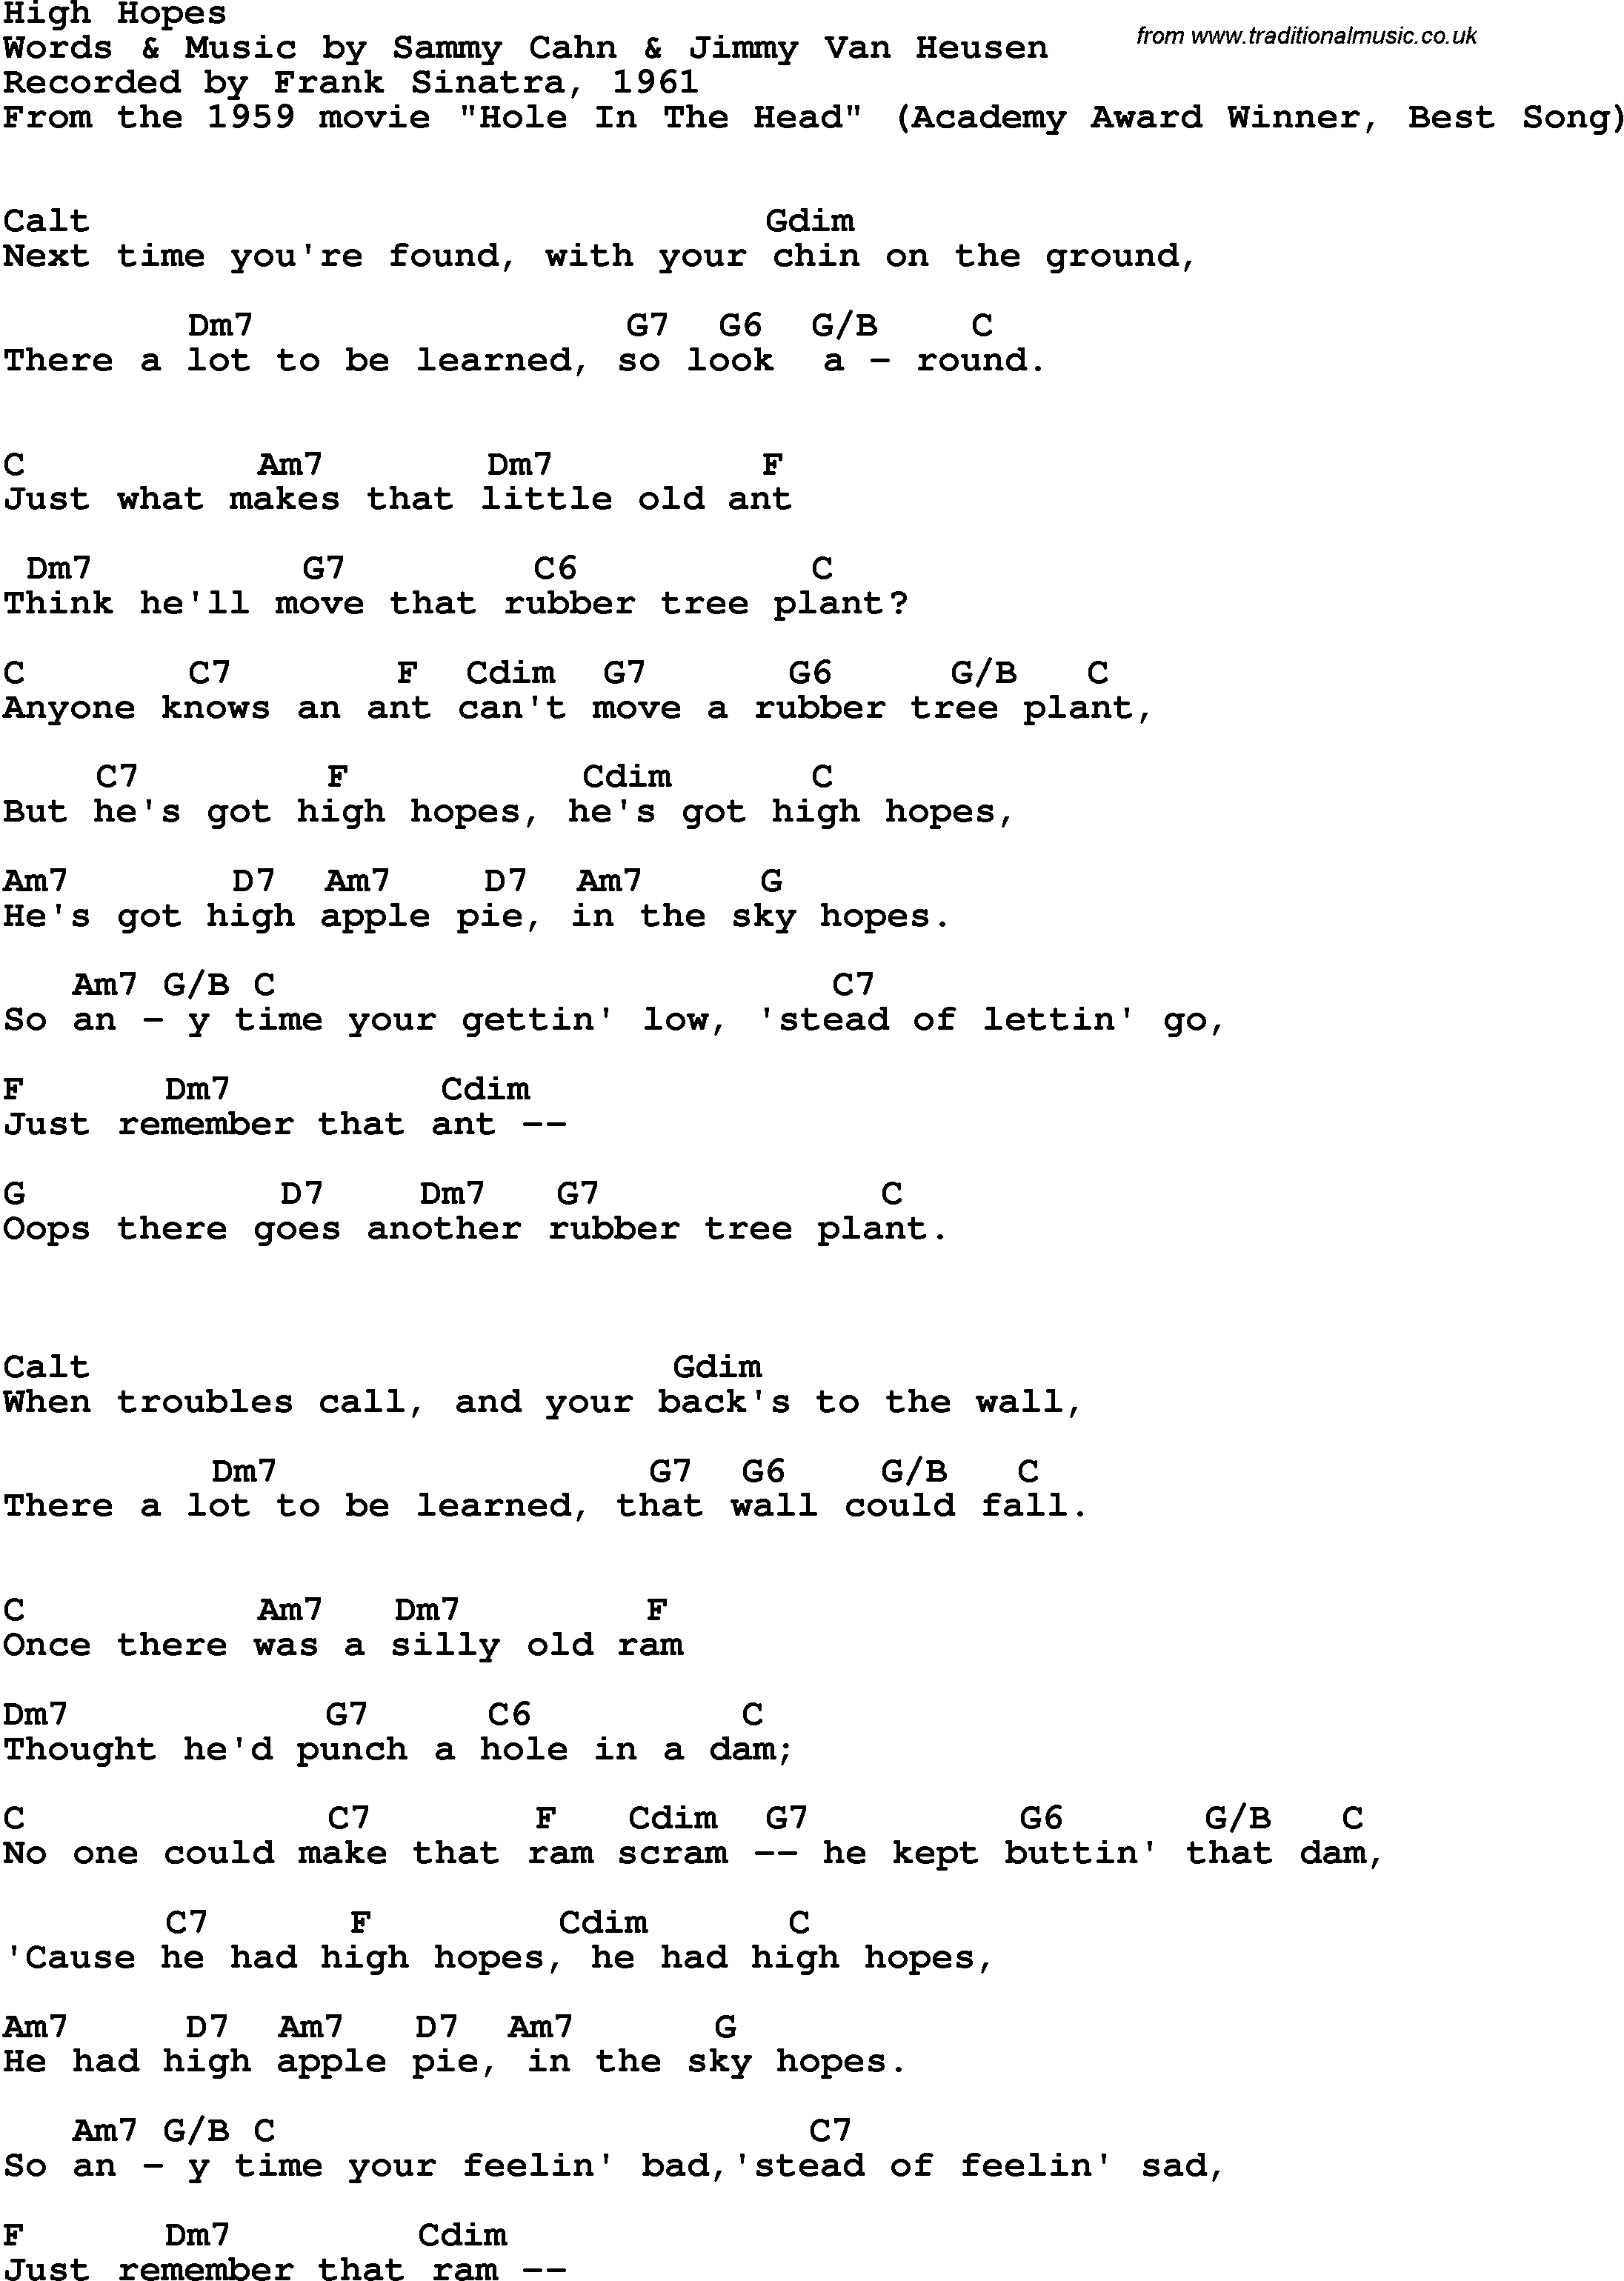 Song Lyrics With Guitar Chords For High Hopes Frank Sinatra 1961